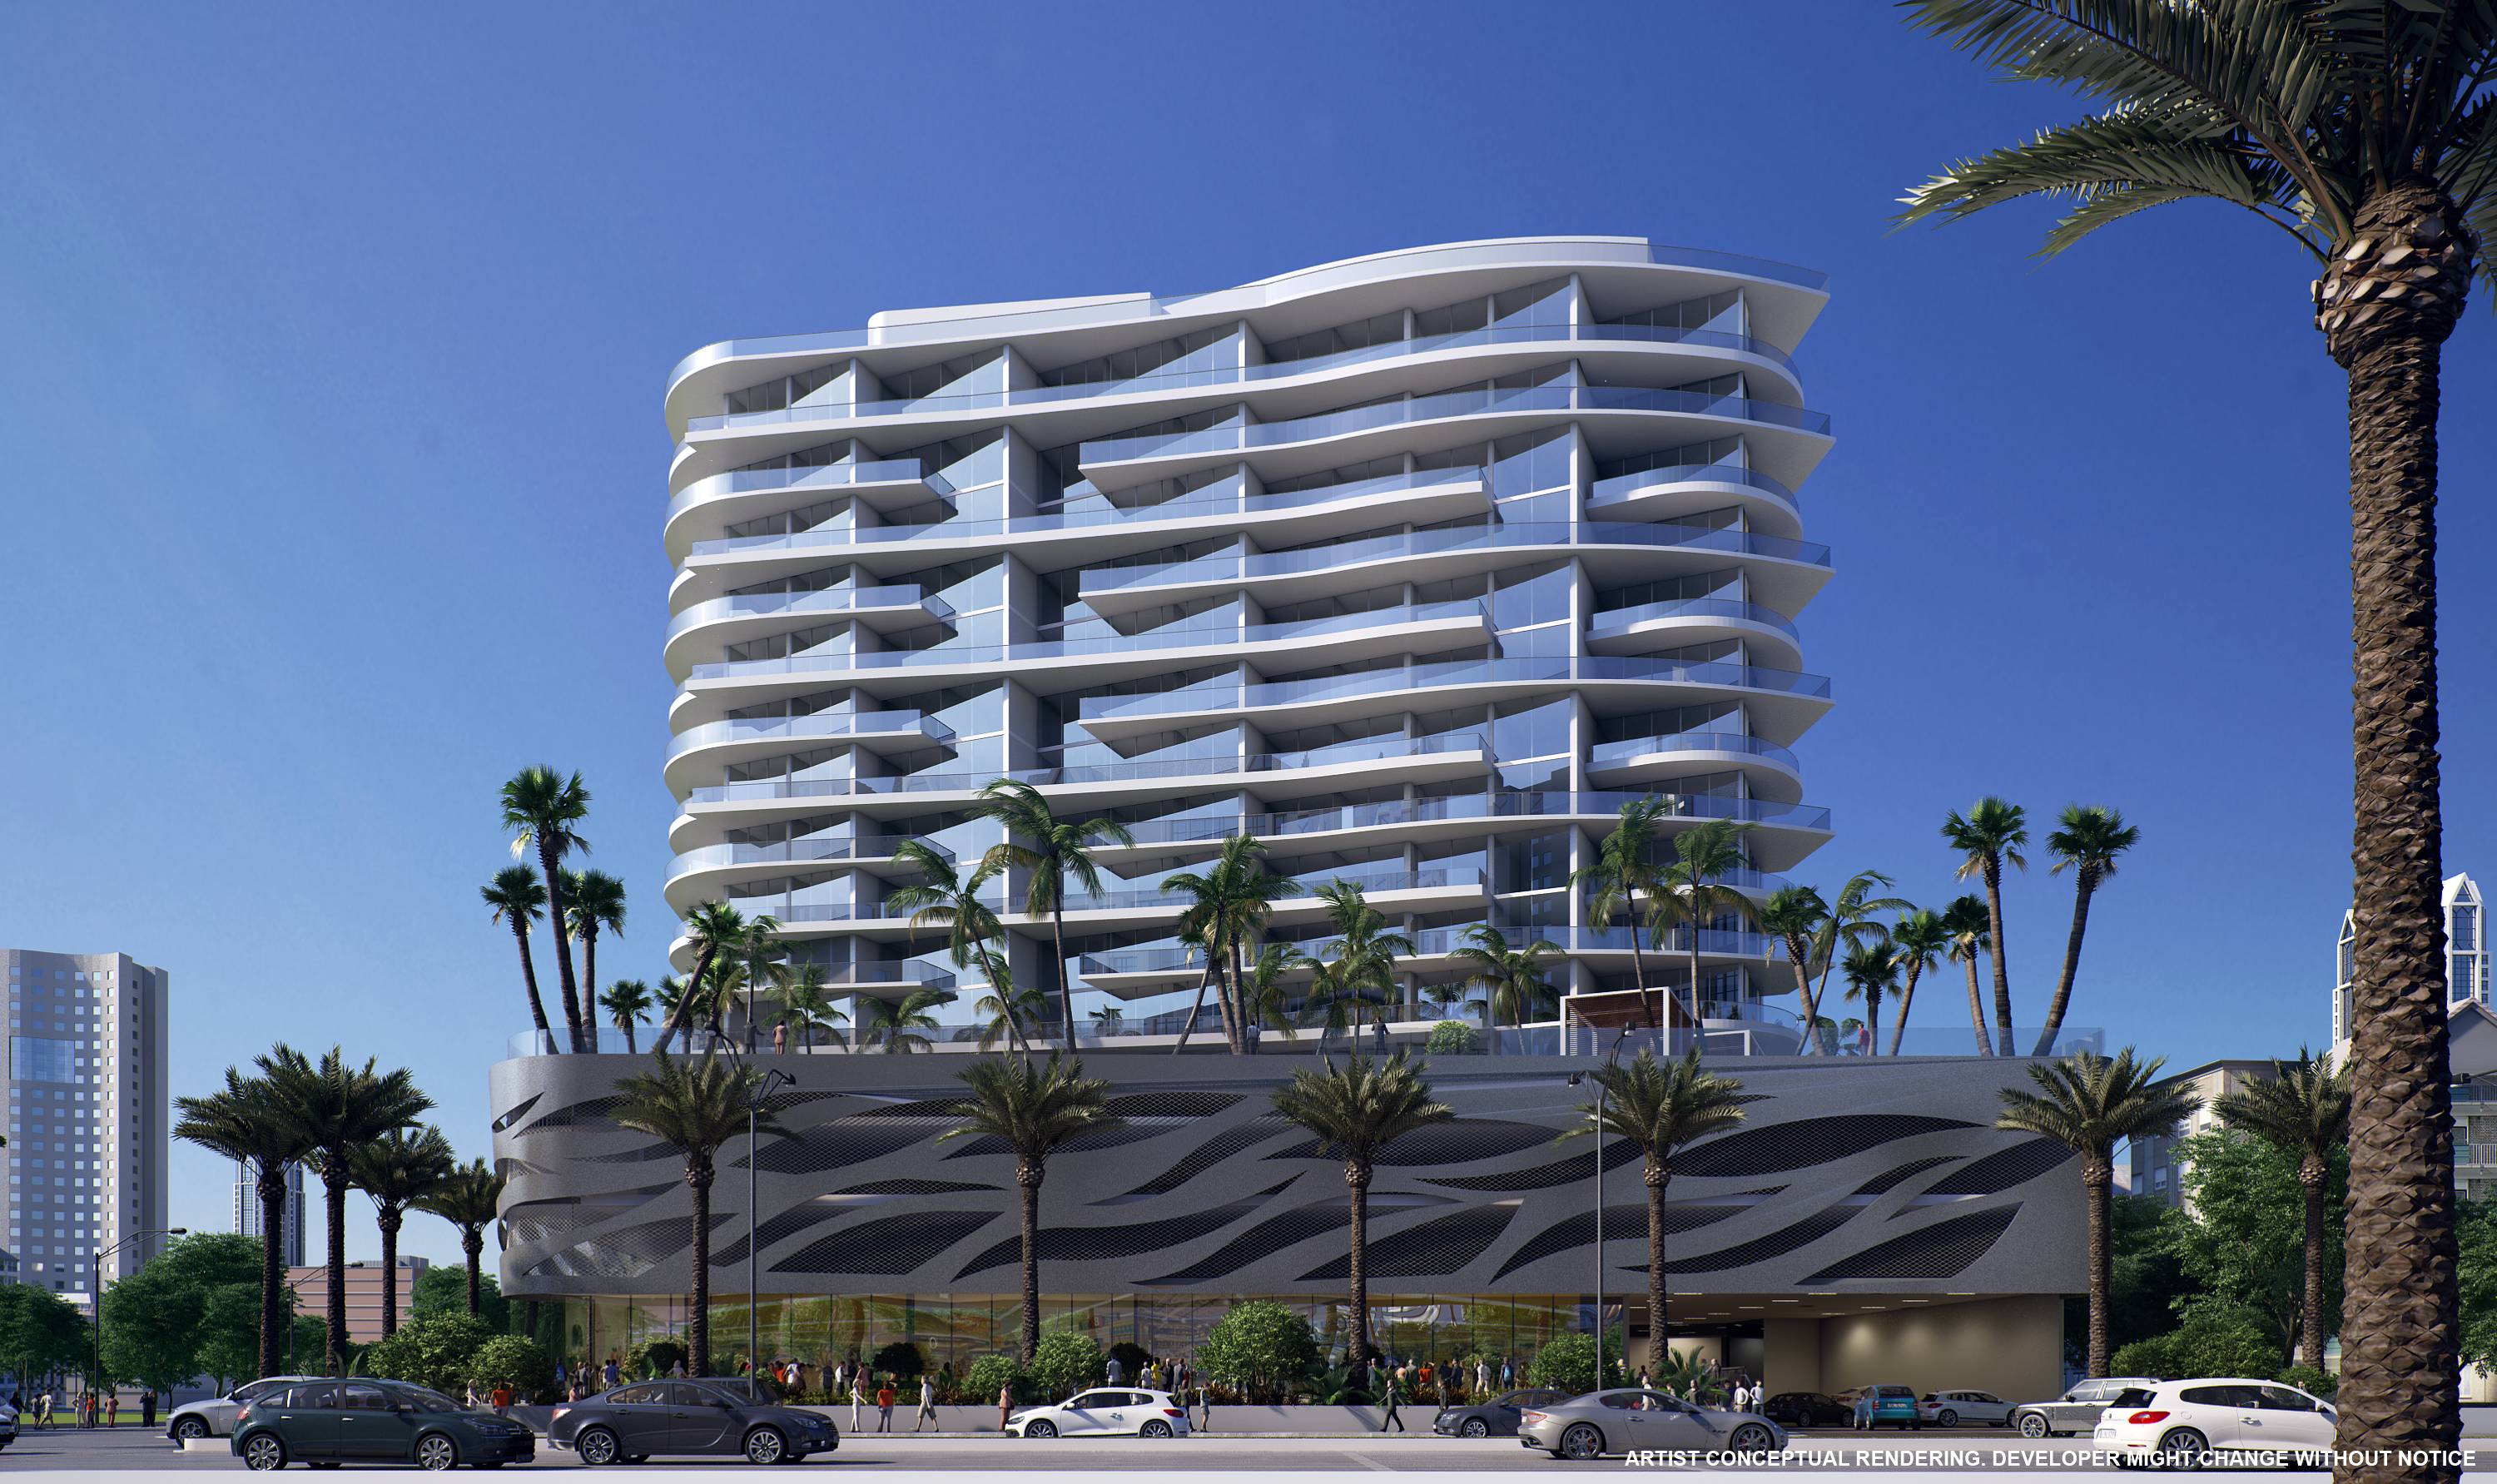 Aurora Sunny Isles Beach | New Construction Boutique Luxury Building with Ocean View | Short-Term Leasing Investment Opportunity